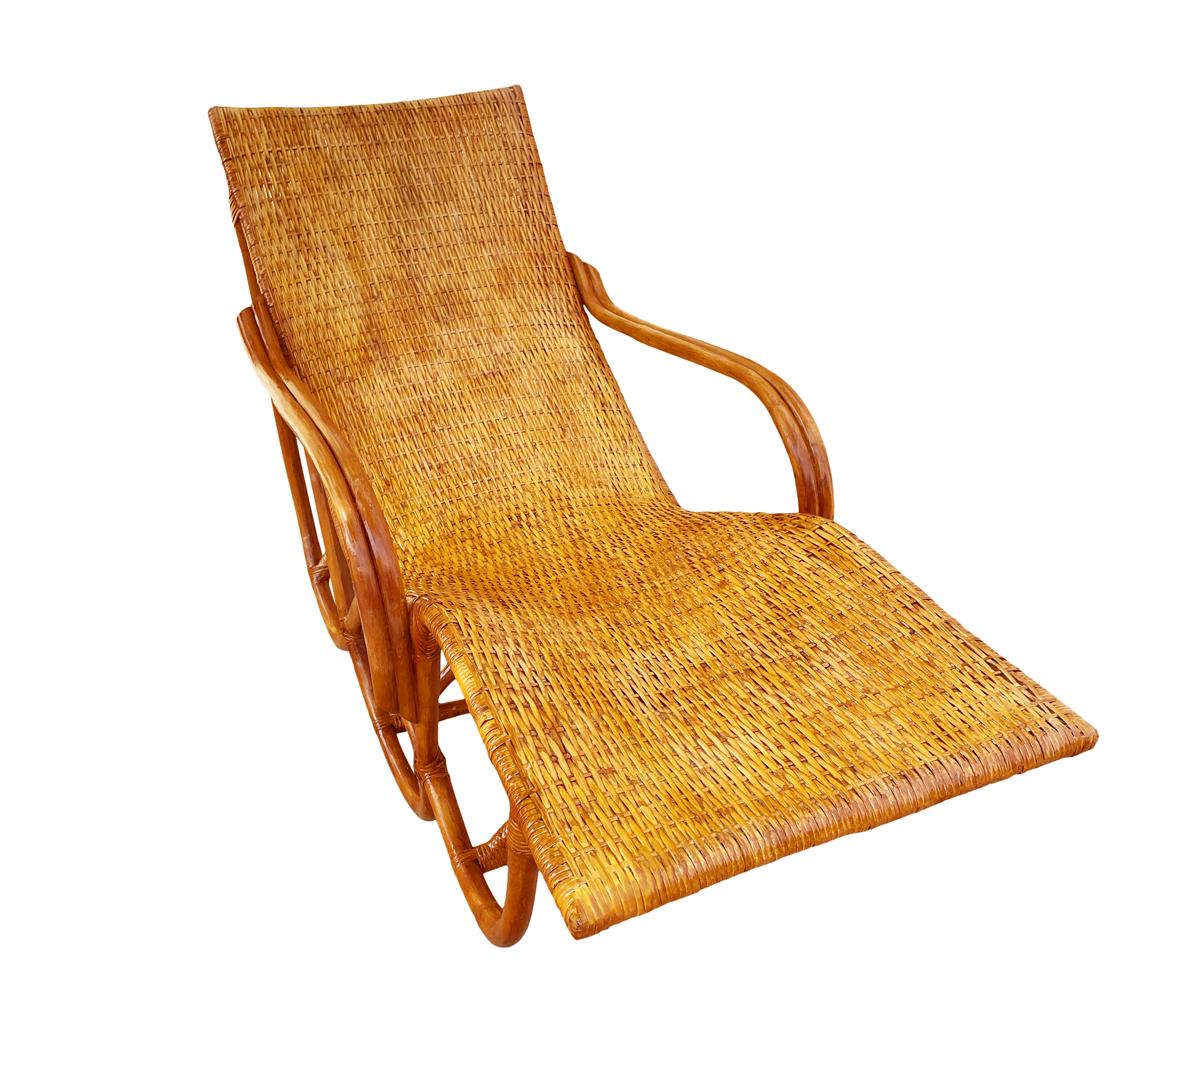 Early Mid-Century Modern Sculptural Bamboo / Rattan Chaise Lounge Chair In Good Condition For Sale In Philadelphia, PA